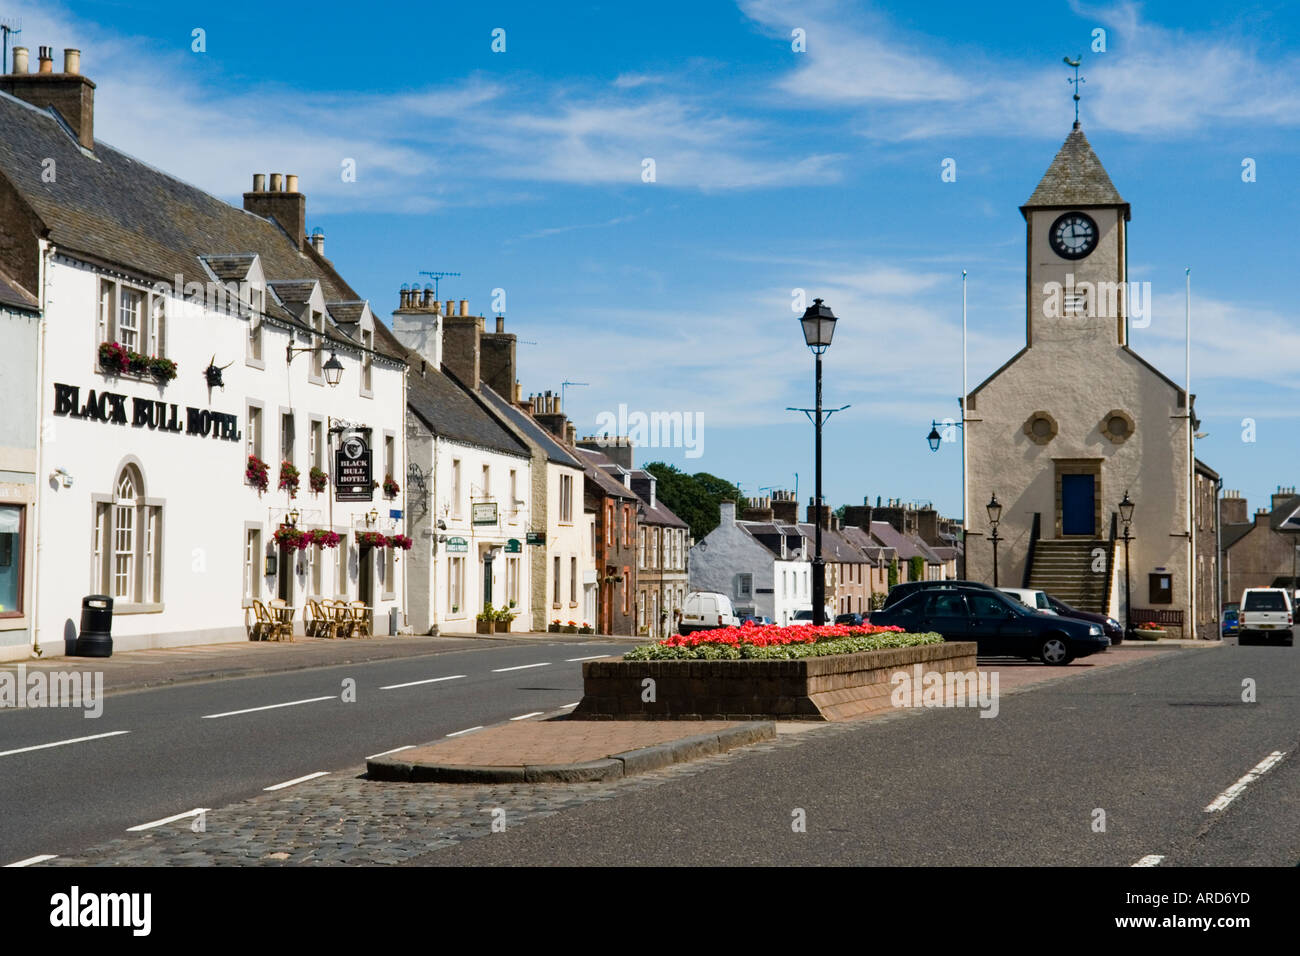 Lauder town in the Scottish Borders south of Edinburgh with Black Bull Hotel and town hall Stock Photo